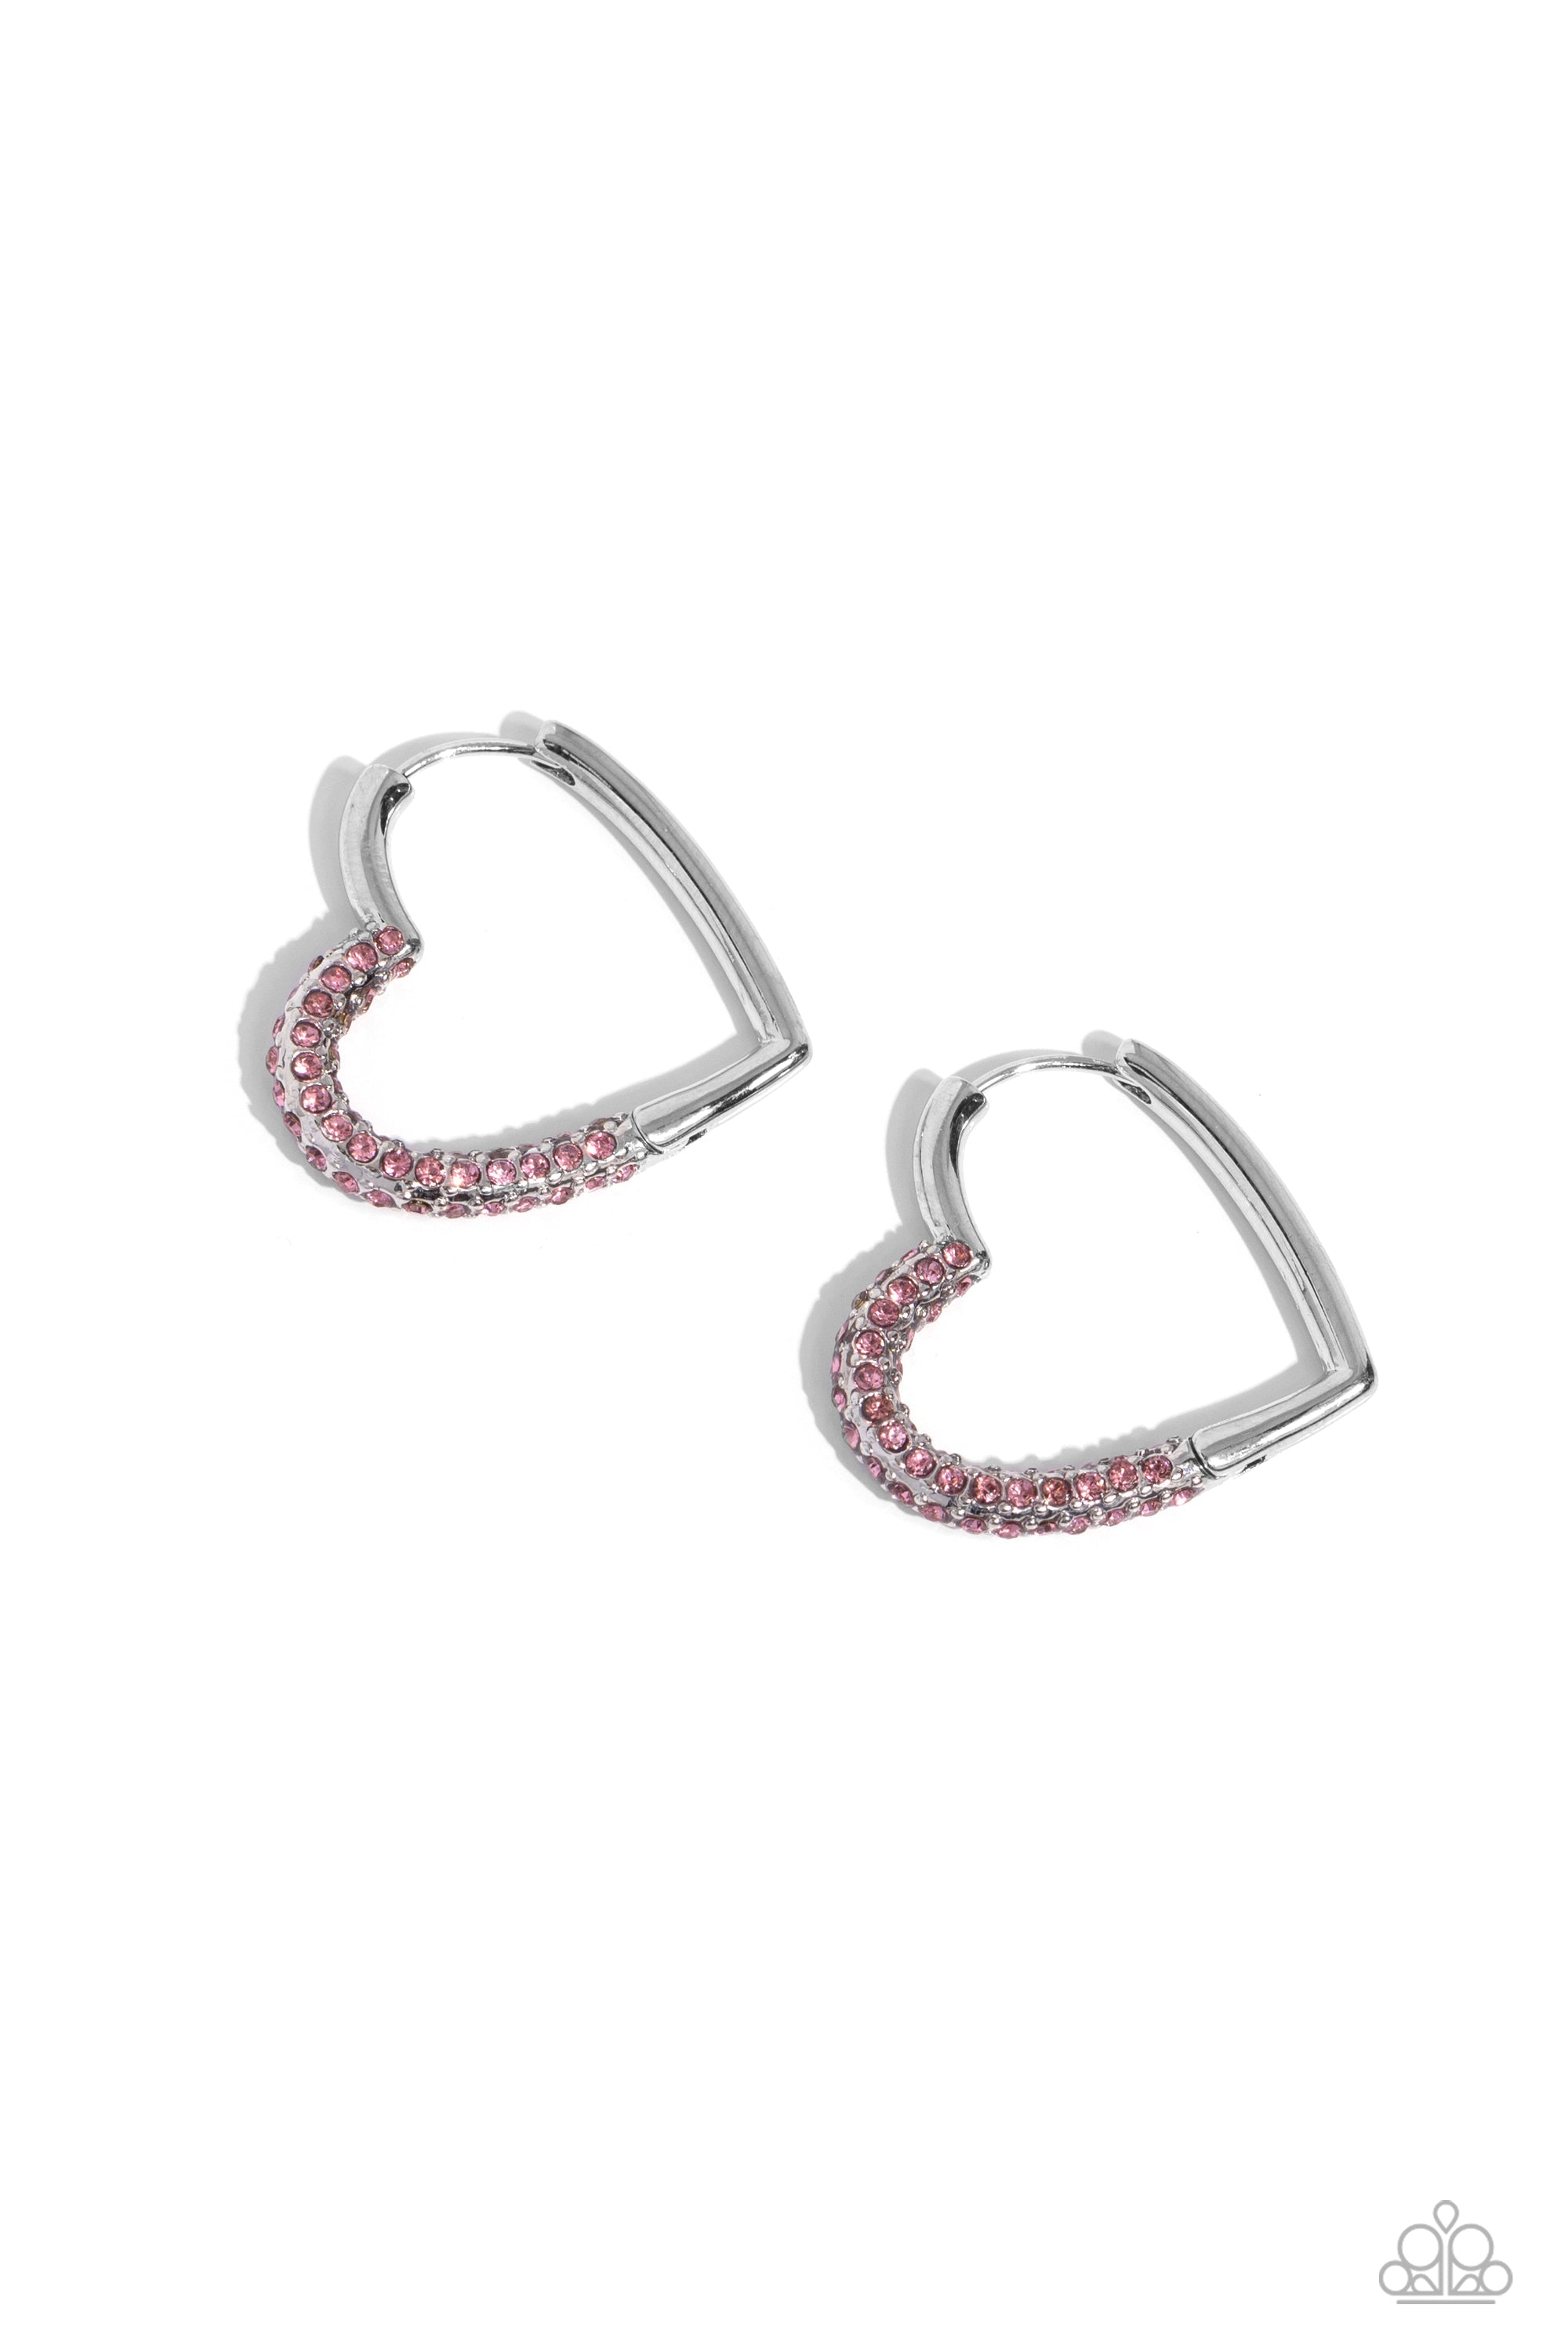 Be Mine, Valentine? Pink Heart Hoop Earrings - Paparazzi Accessories- lightbox - CarasShop.com - $5 Jewelry by Cara Jewels